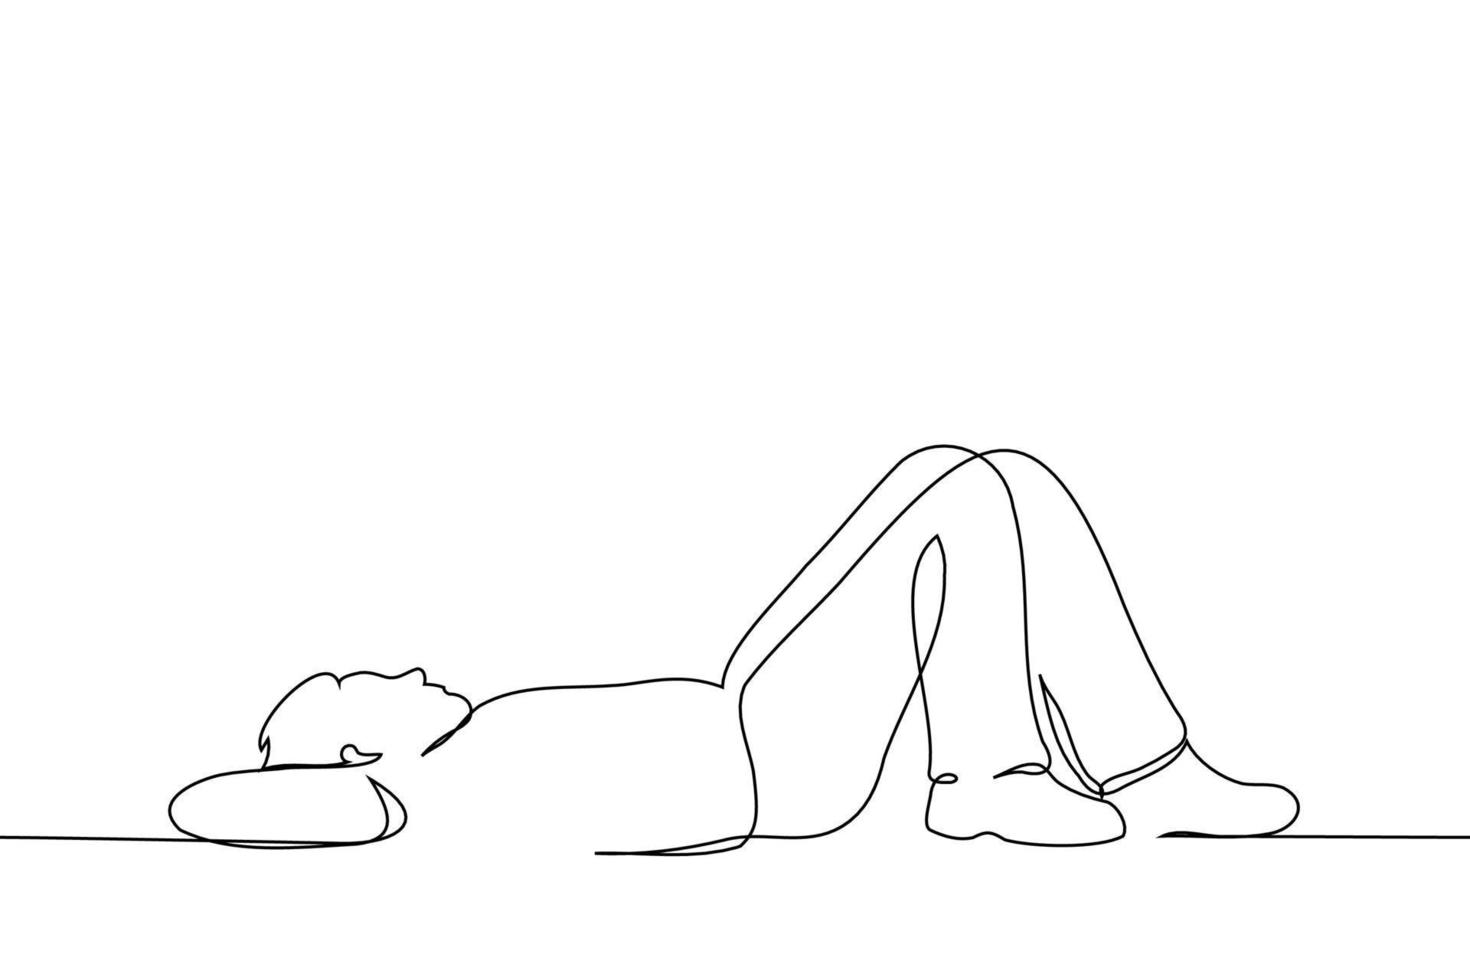 man lying on his back with his legs bent - one line drawing vector. concept to wallow, procrastinate, lie down vector